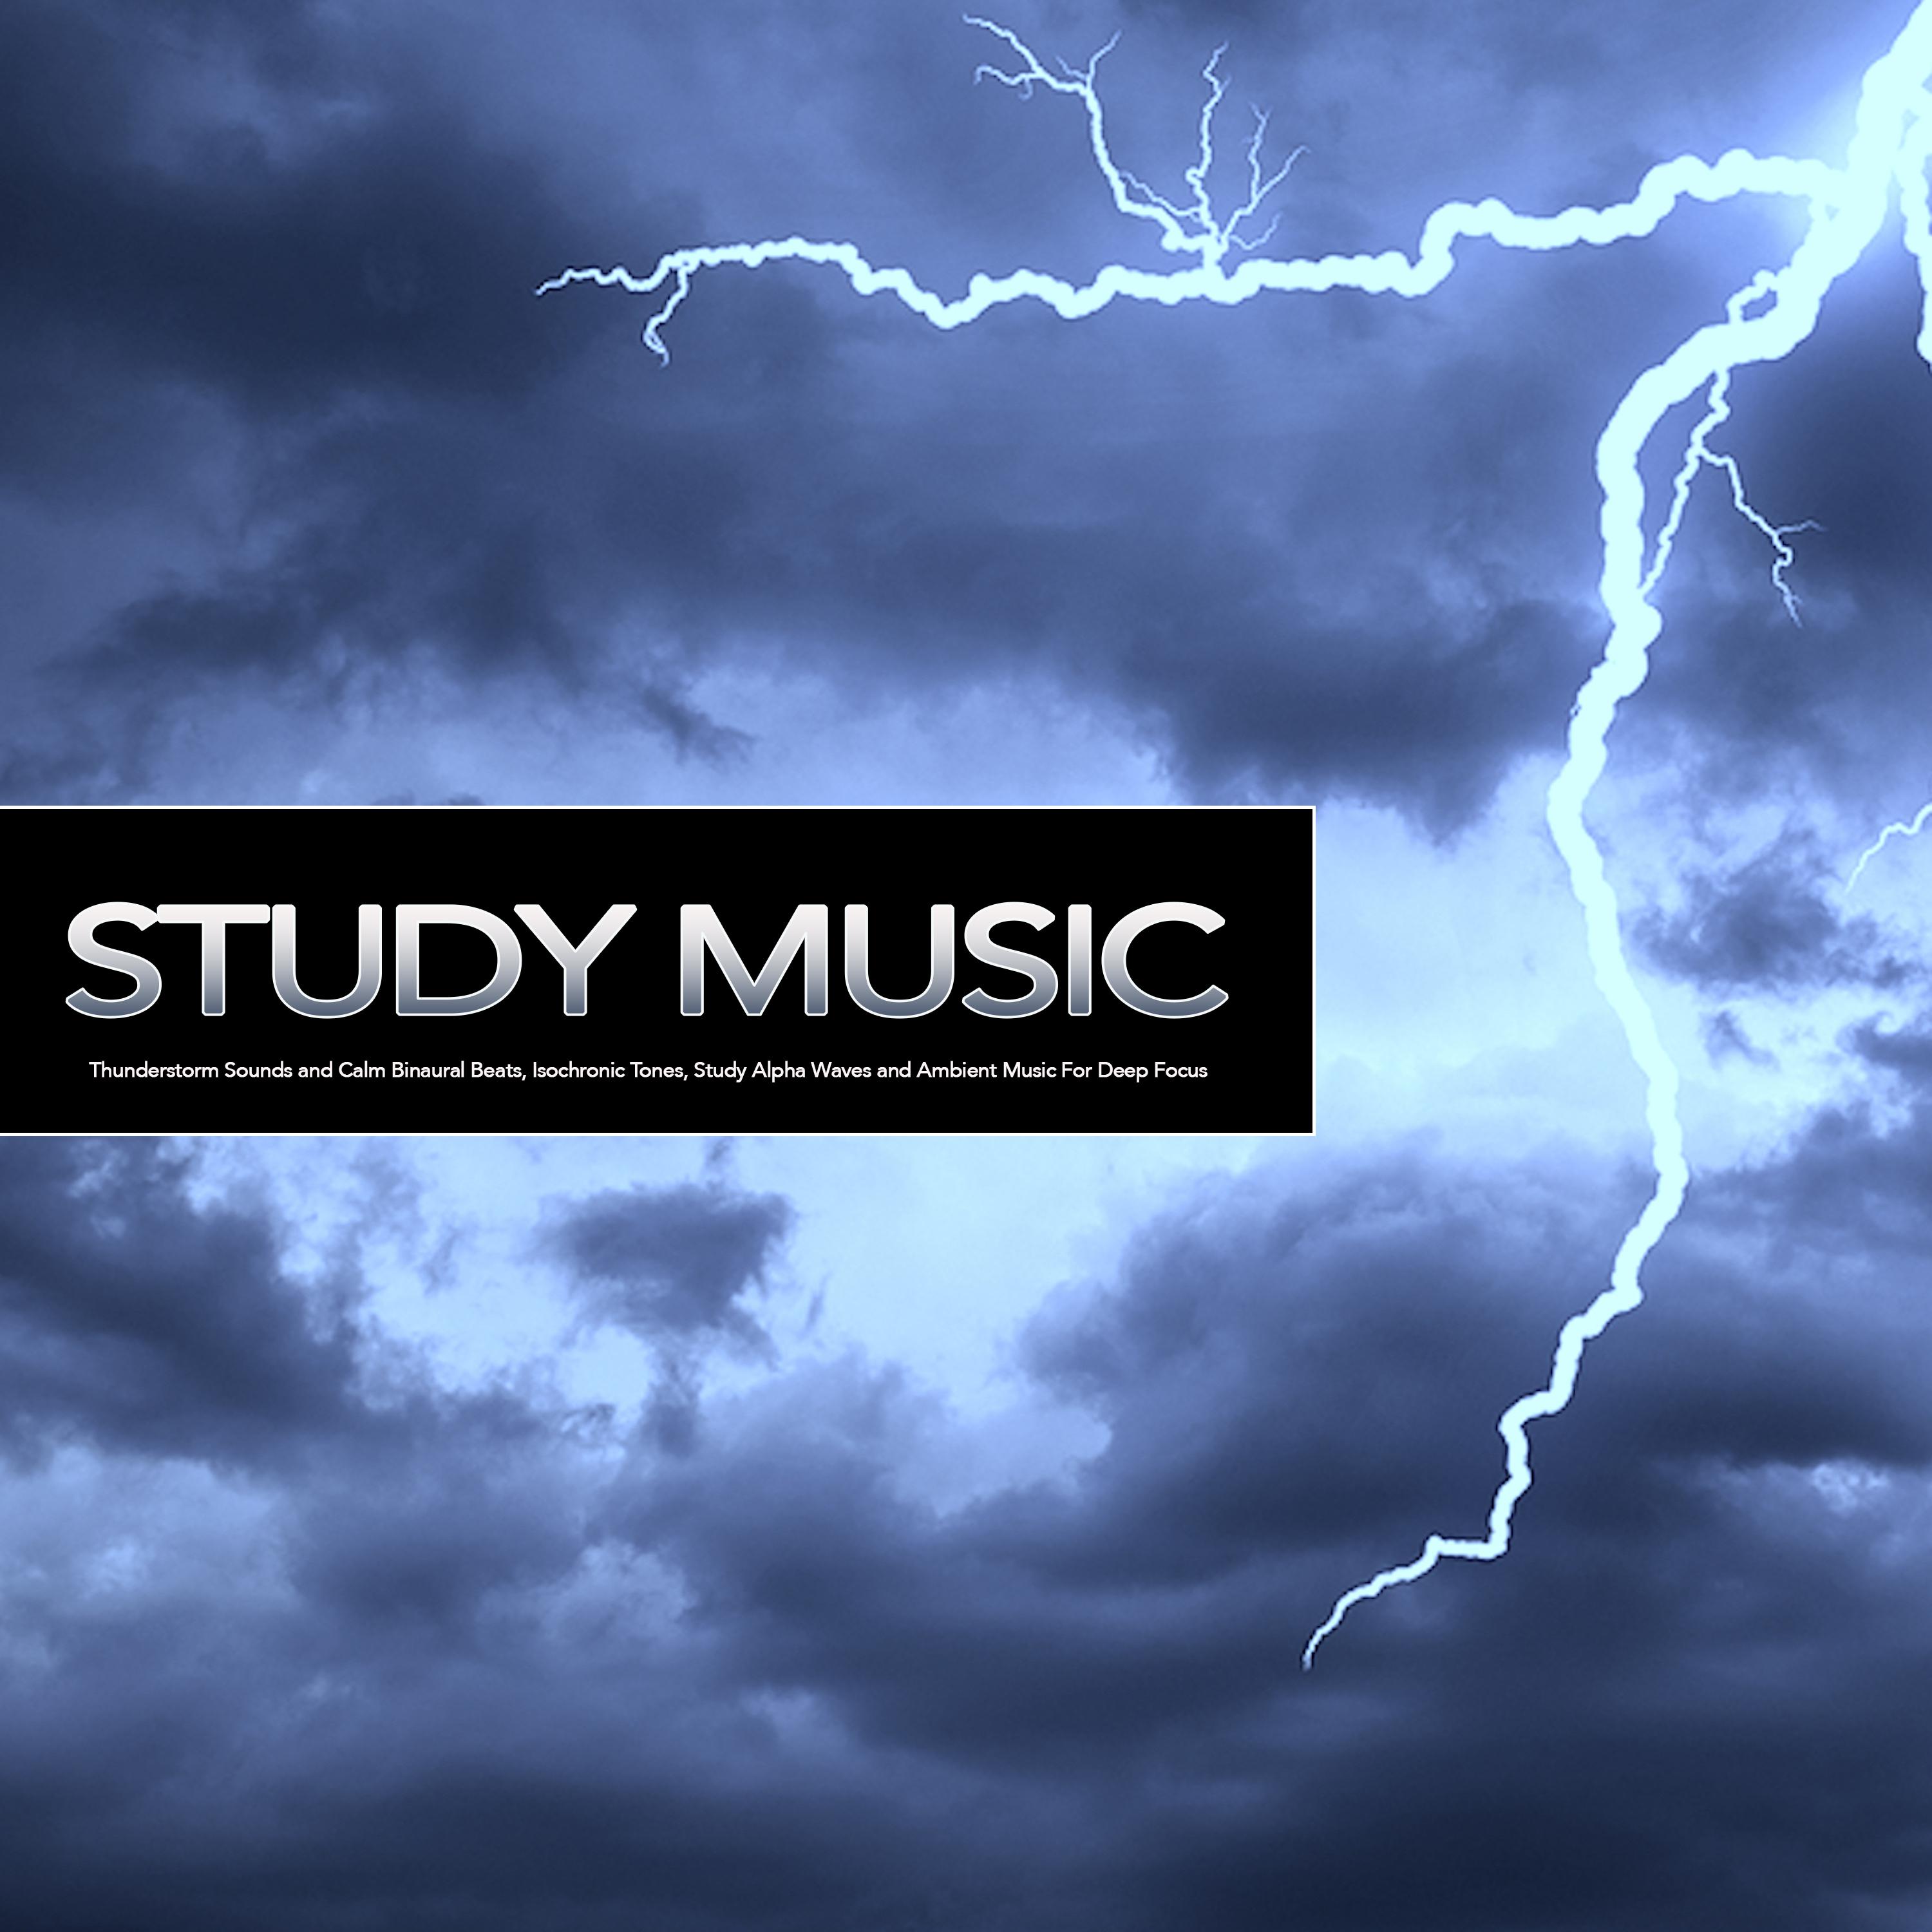 Binaural Beats and Thunderstorm Sounds